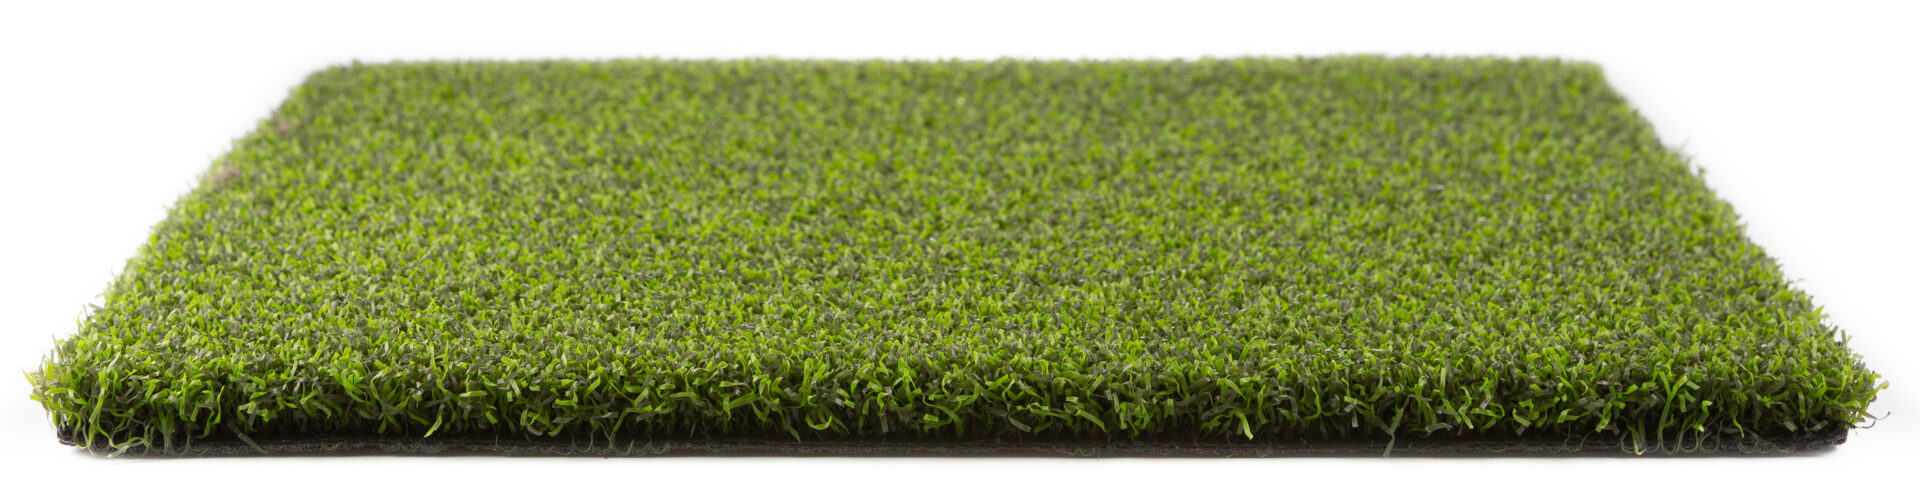 Premium Grass Blades Synthetic Artificial Turf Putting Green 30 Angle